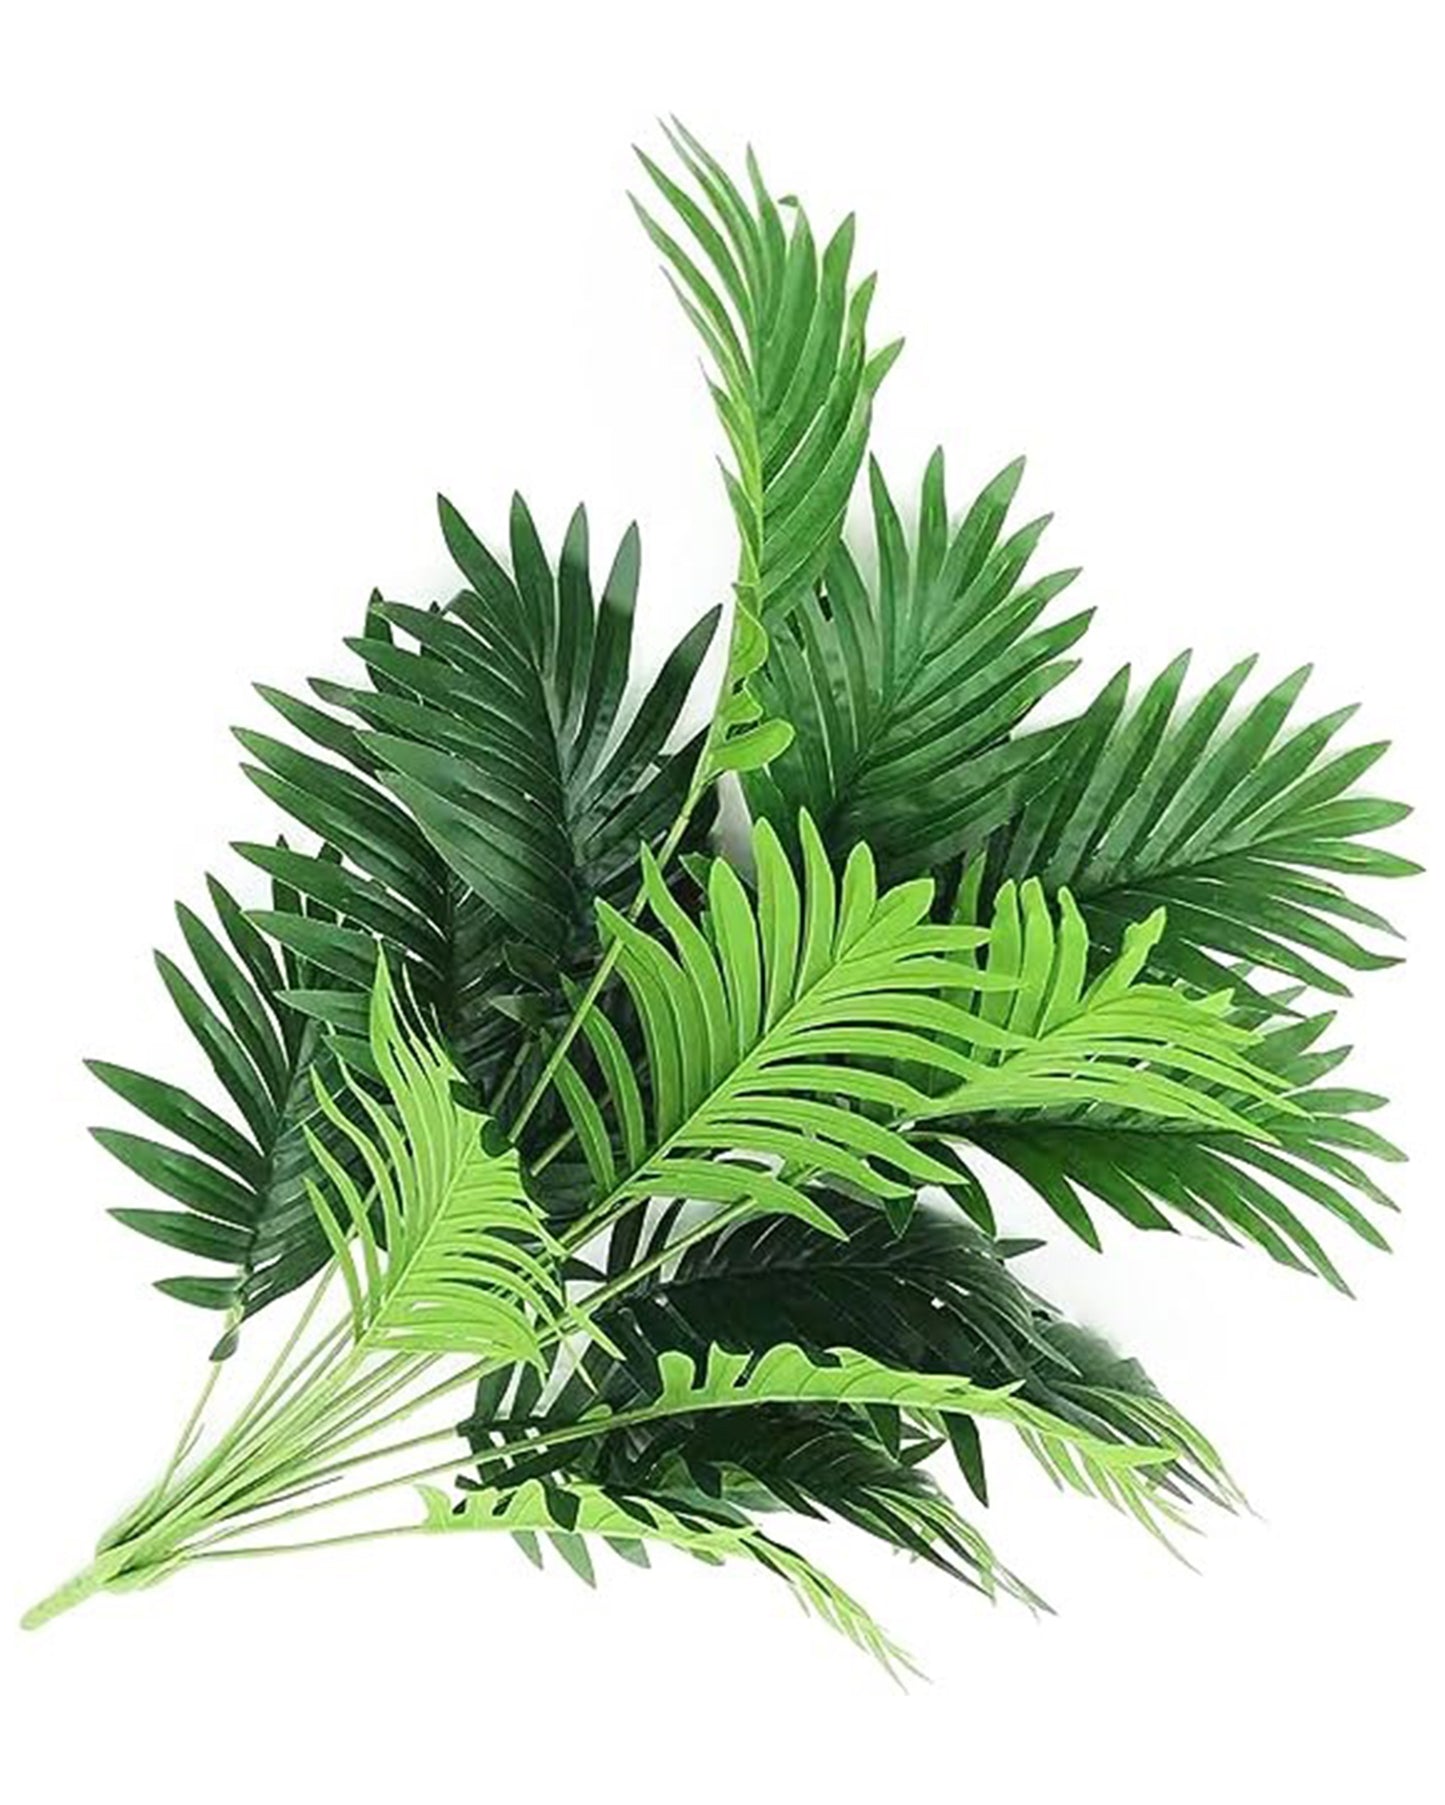 Artificial Faux Palm Plants Acacia/Green Tropical Plant Tree for Home Decor Living Room Corner Office Small Medium Size 28 inch (Without Pot, 1)